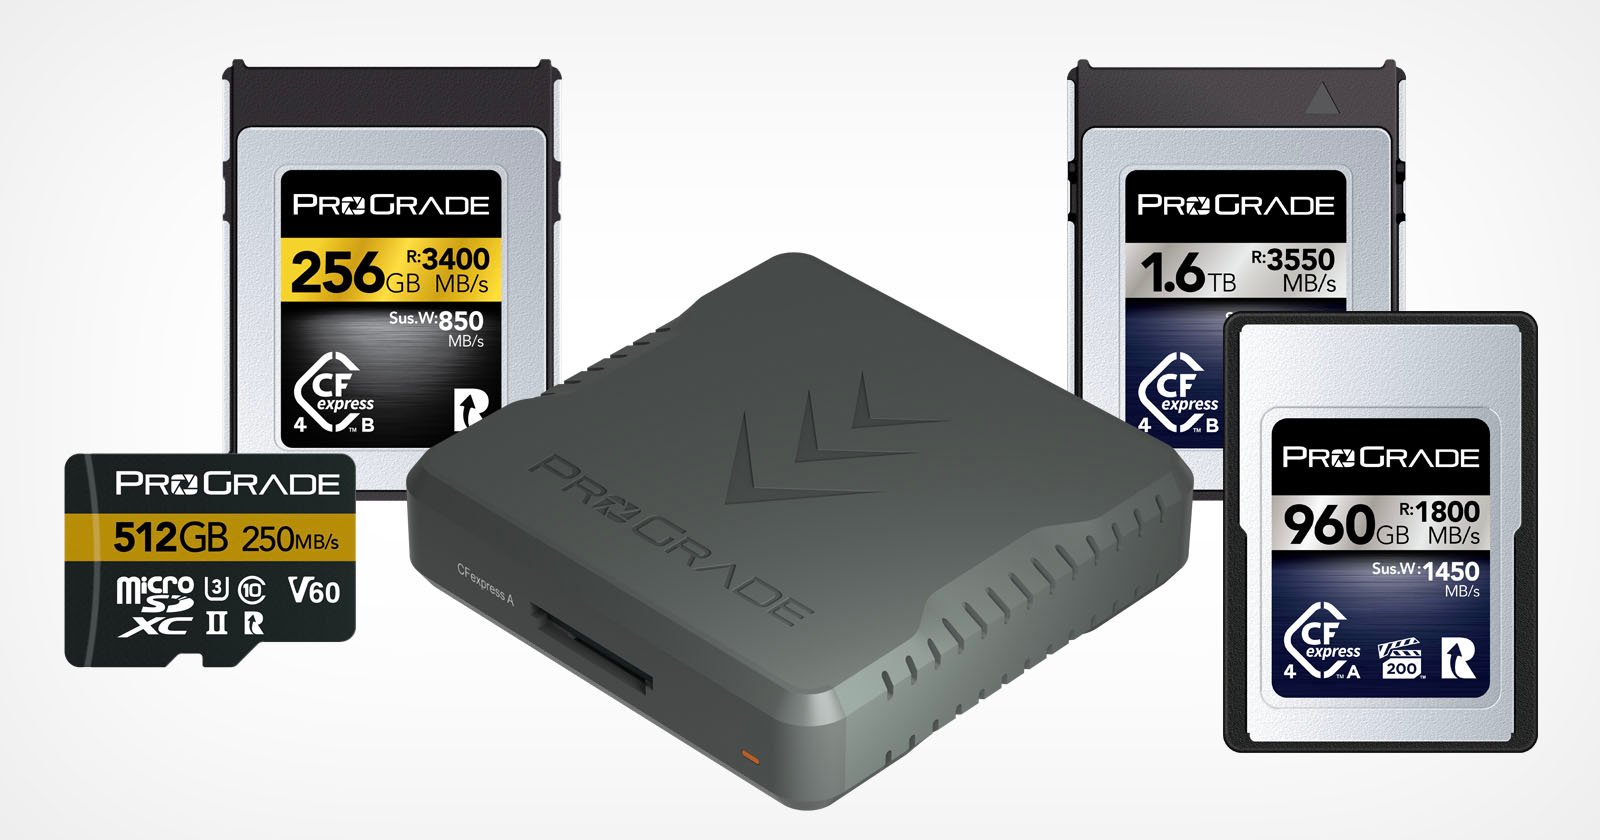  prograde digital memory cards give users speed 